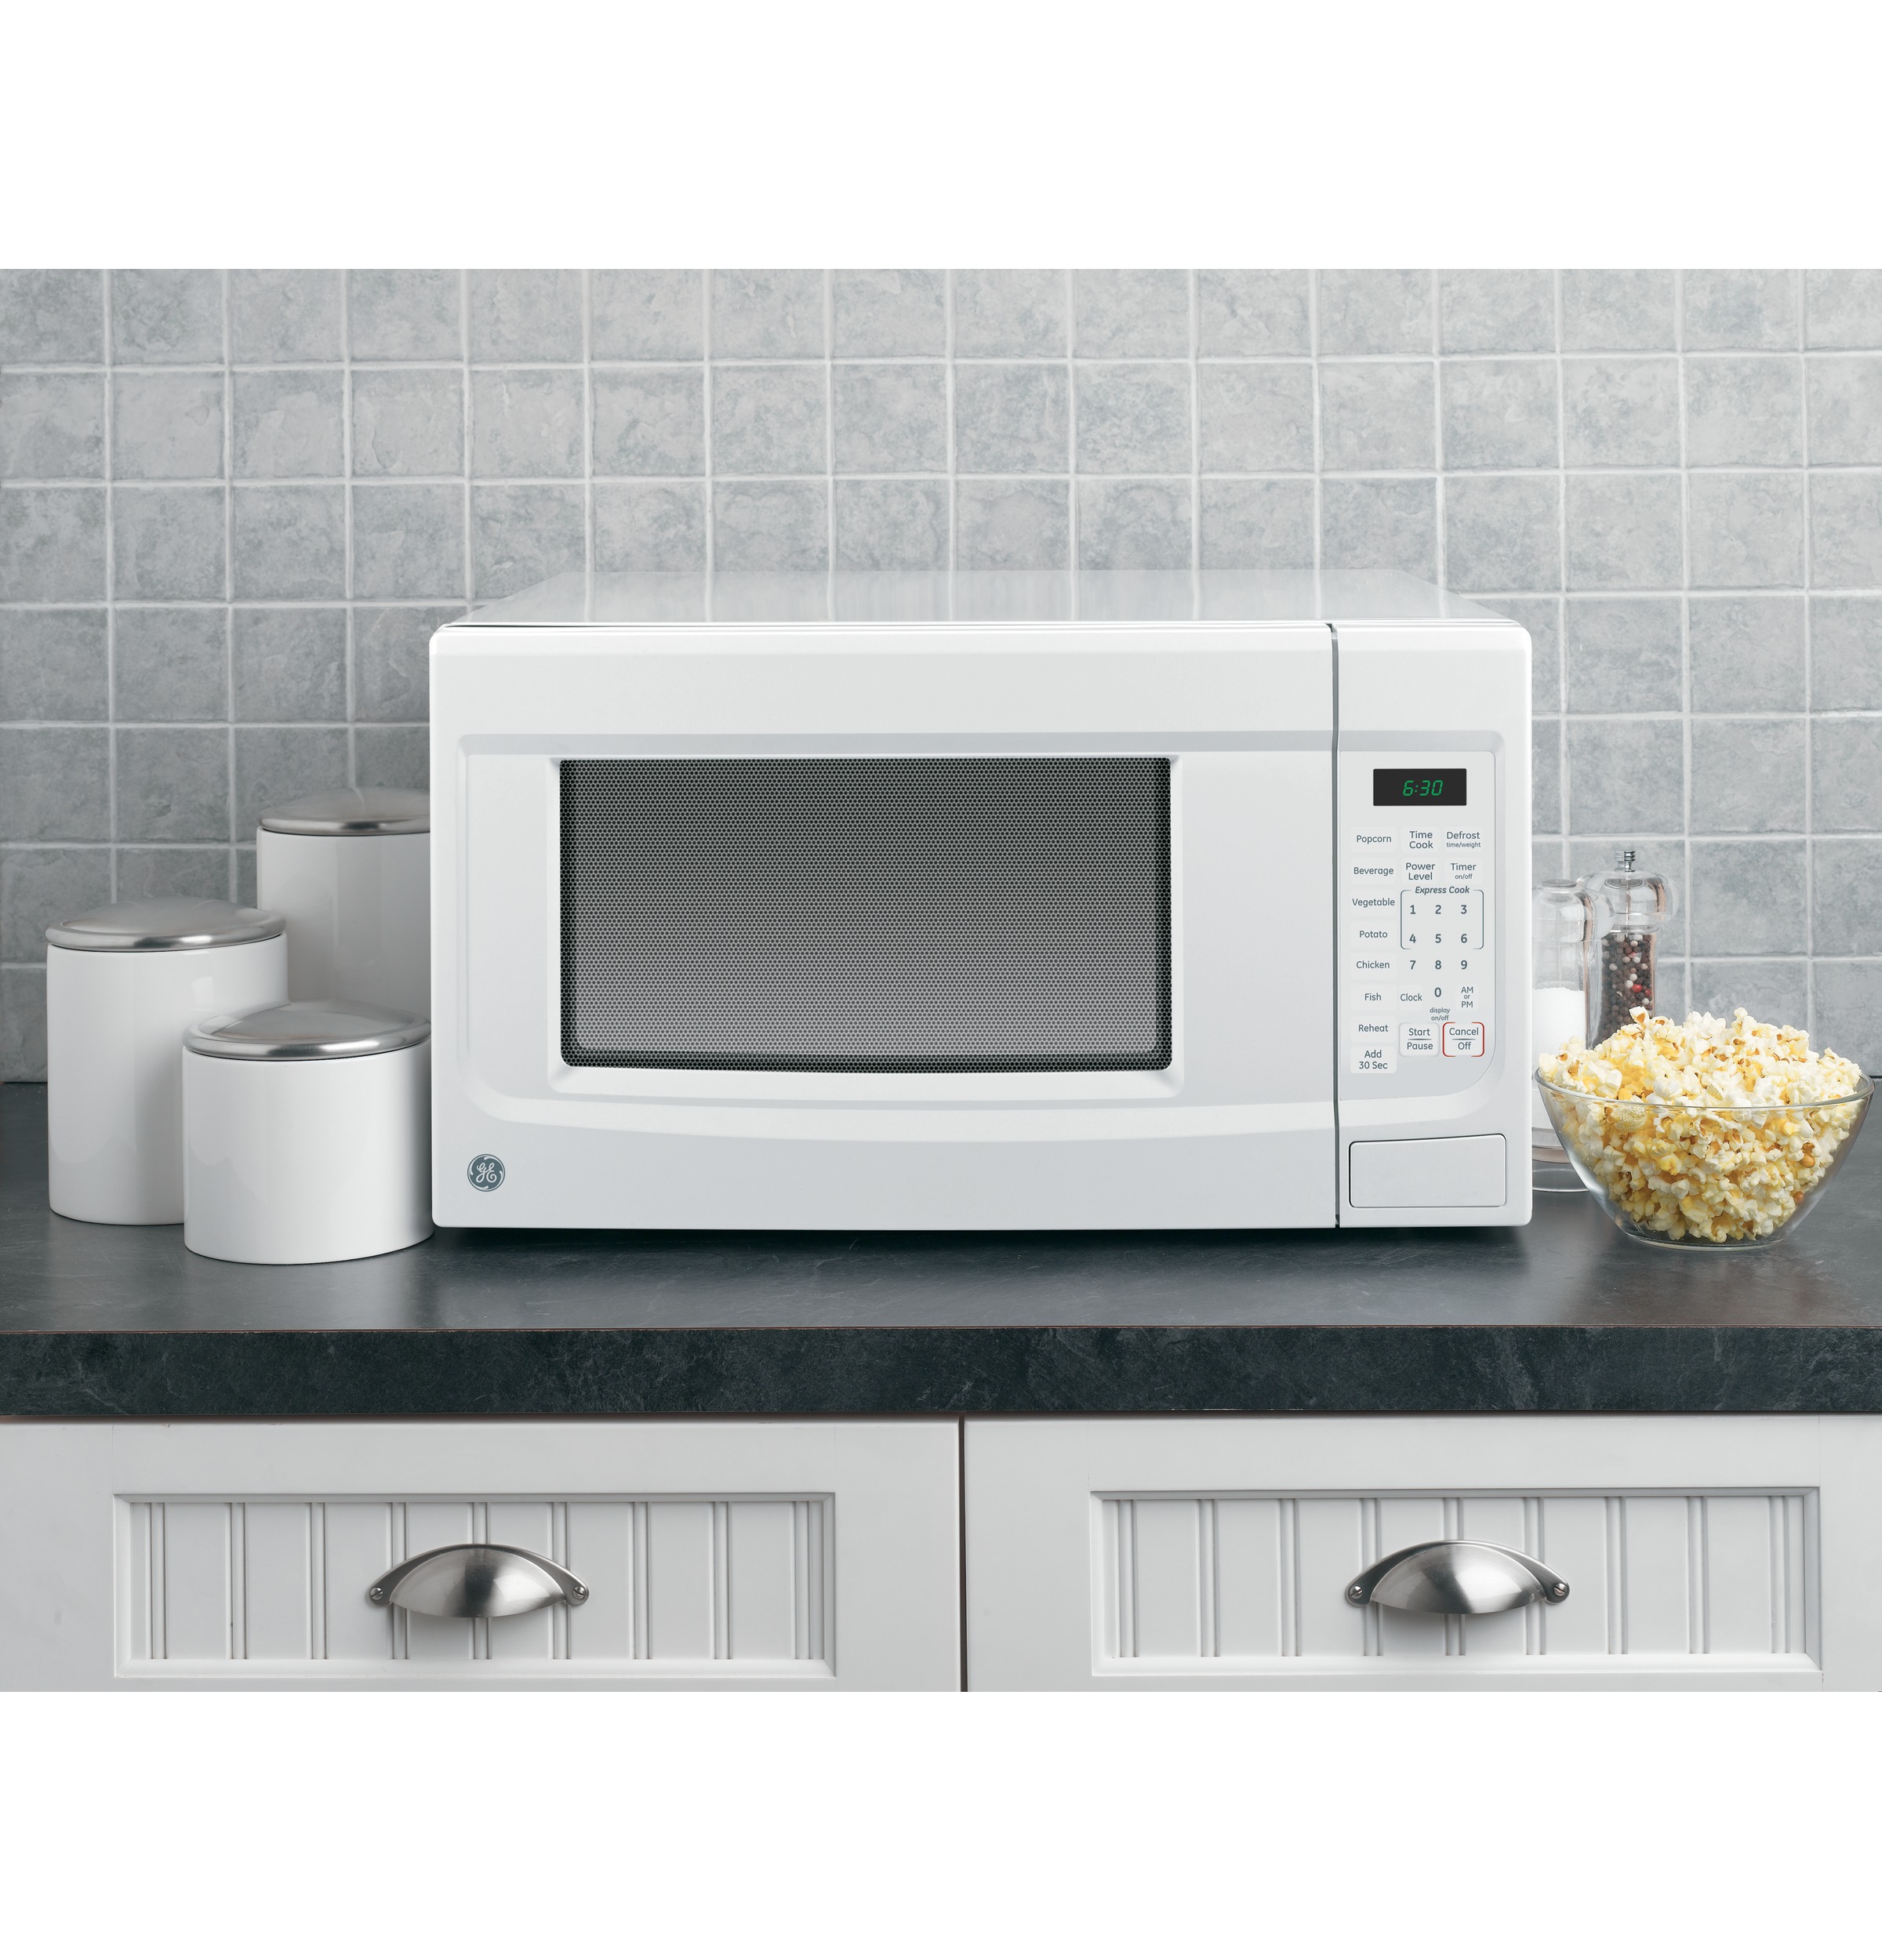 GE® 1.4 Cubic Foot Capacity Countertop Microwave Oven, White, JES1460DSWW - image 3 of 11